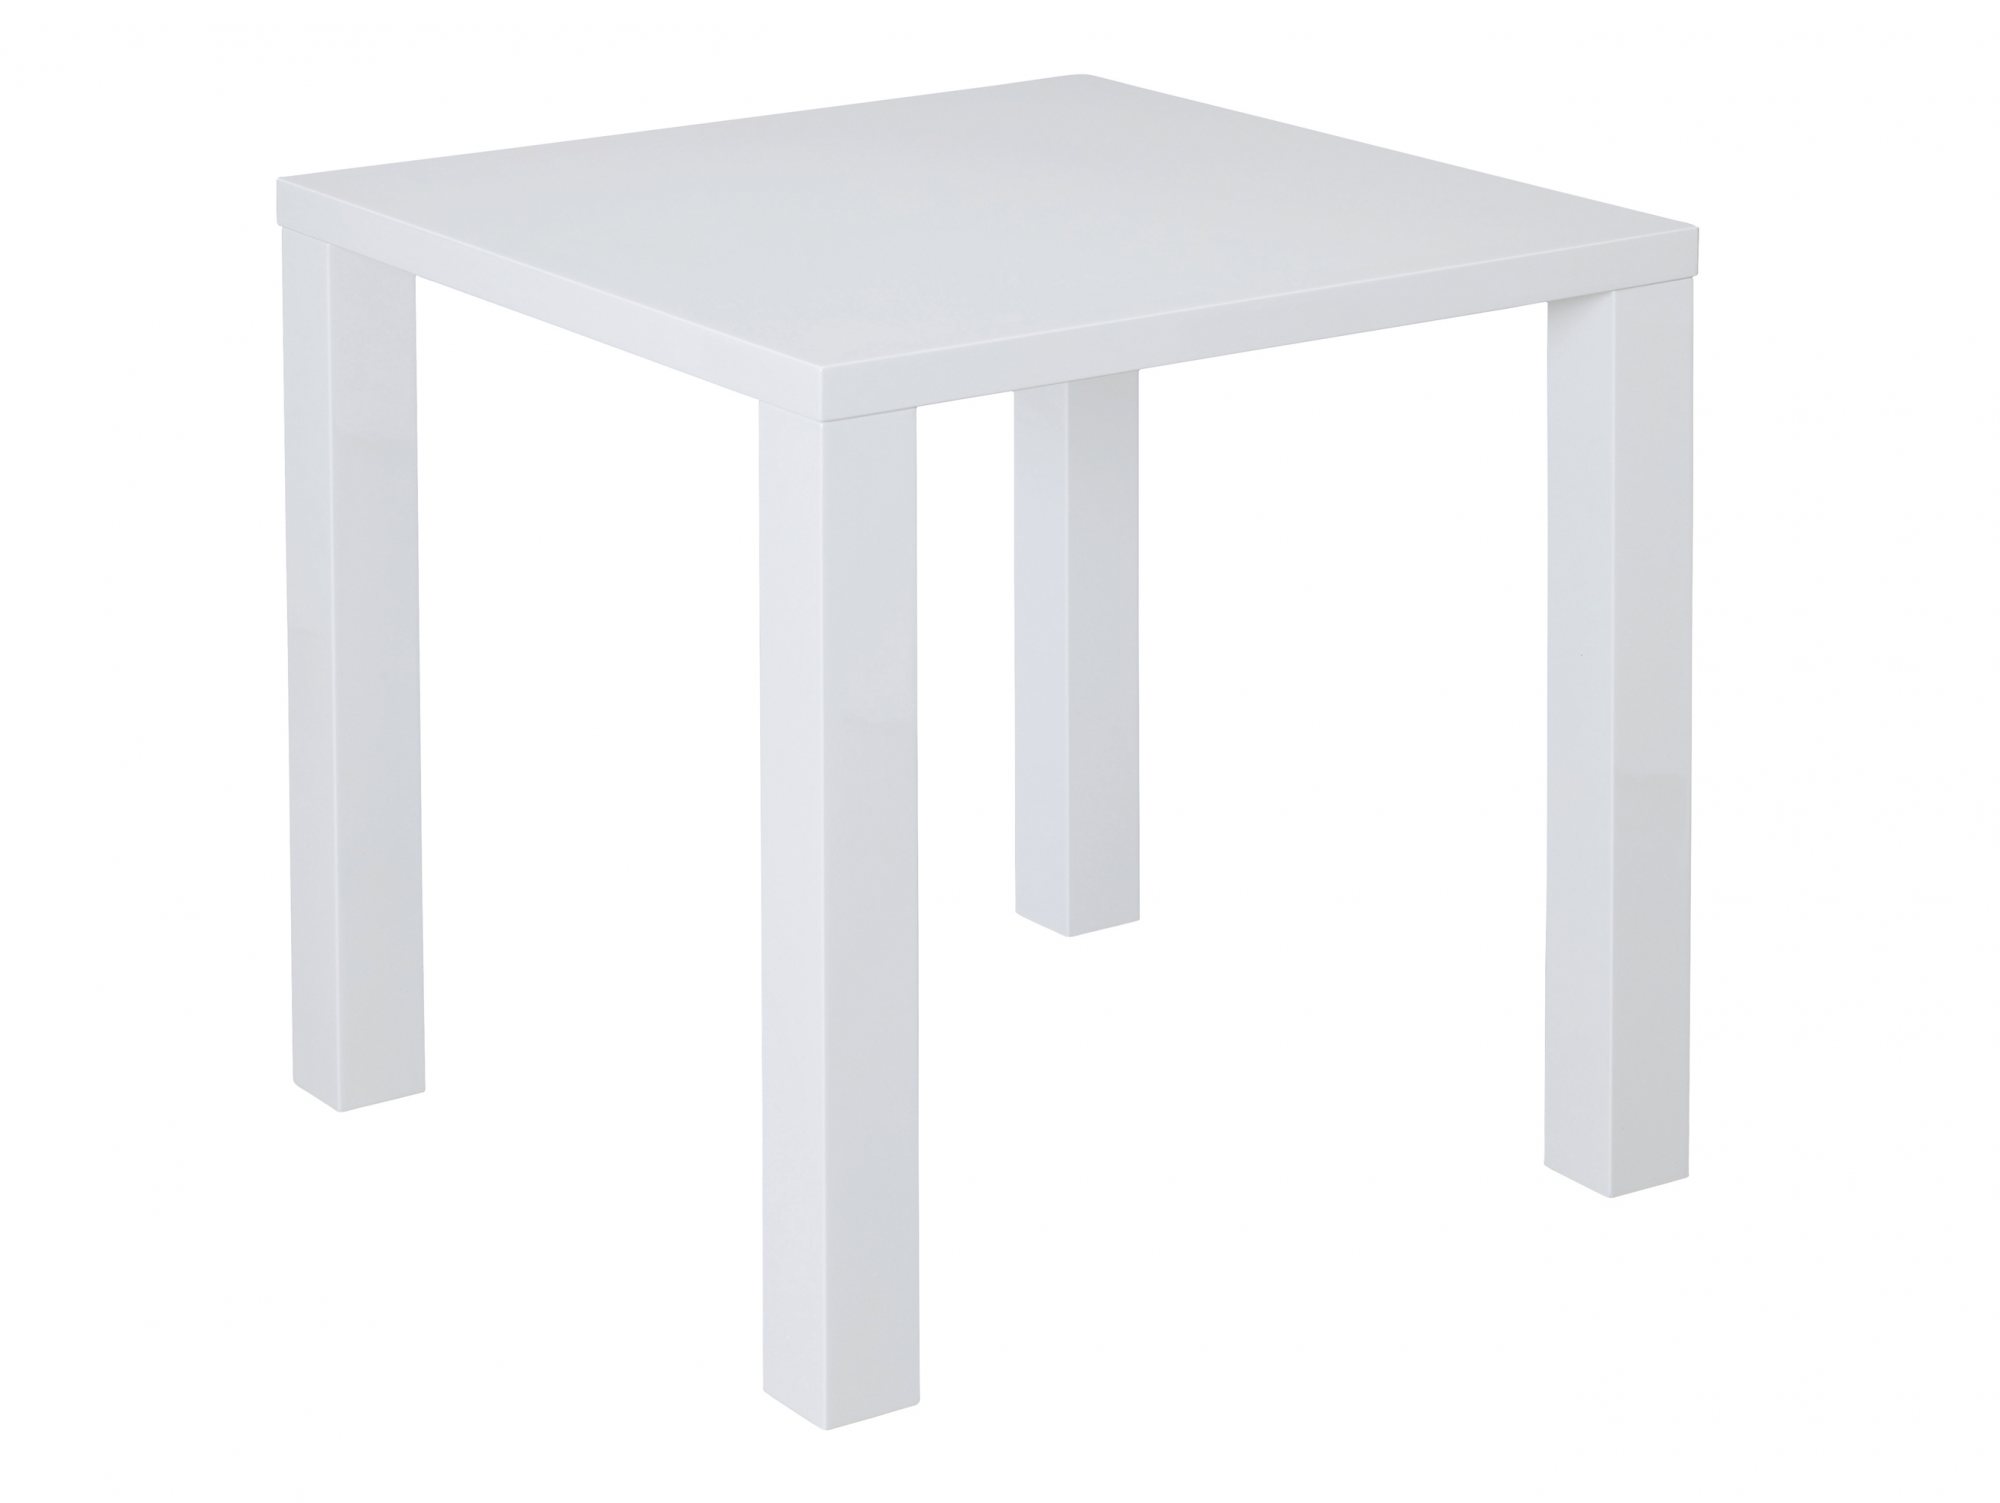 LPD LPD Monroe Puro 79cm White High Gloss Dining Table (Flat Packed)